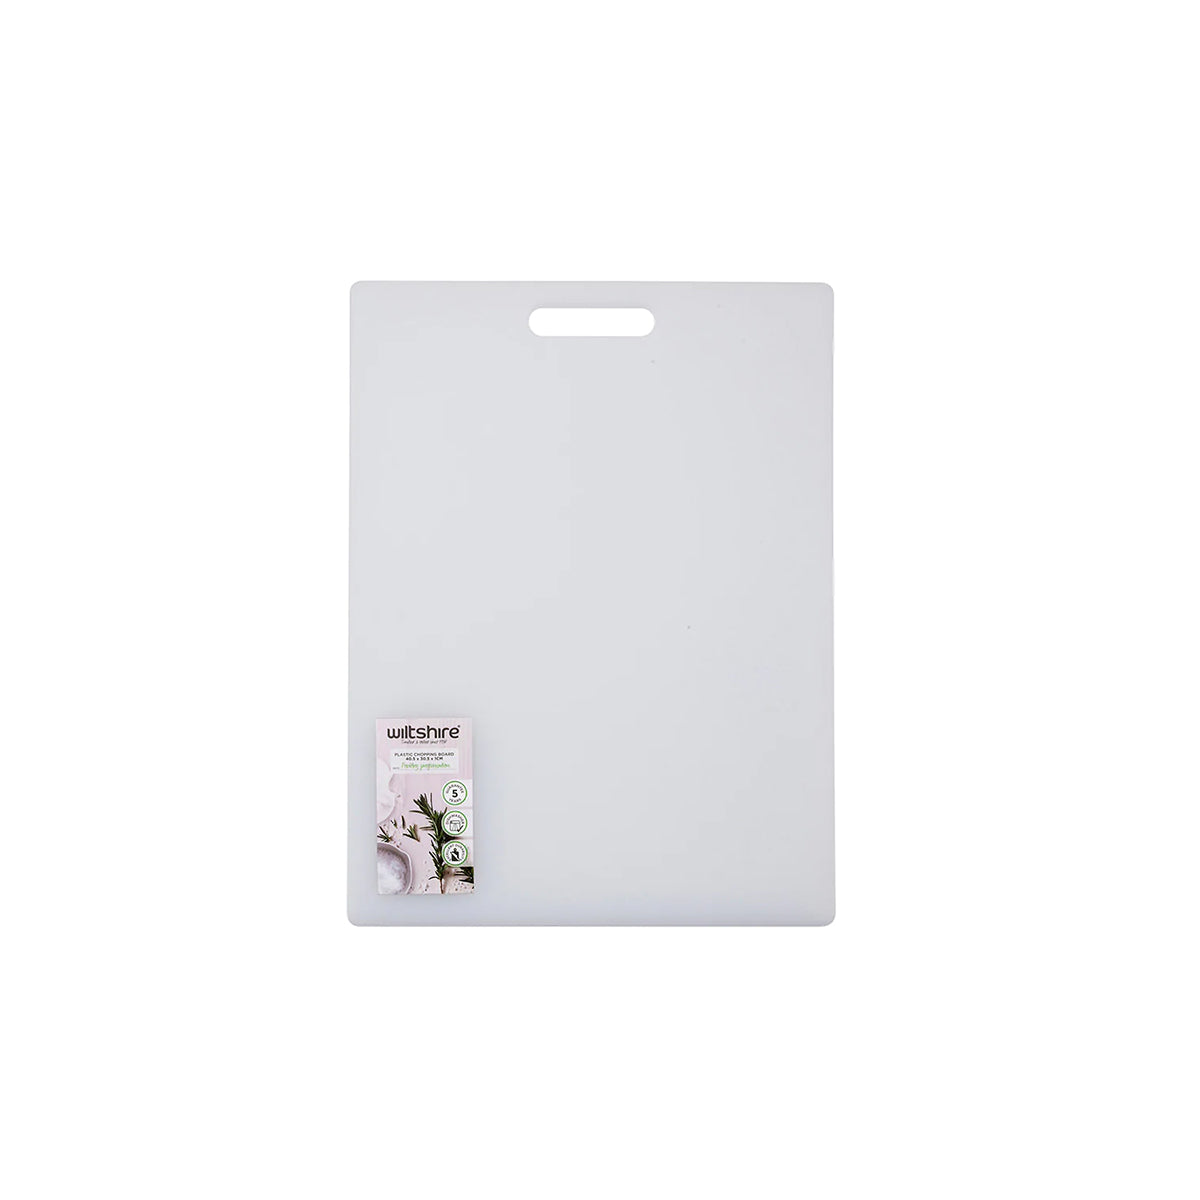 WLT49032 WILTSHIRE White Cutting Board Large 405x305x10mm Tomkin Australia Hospitality Supplies